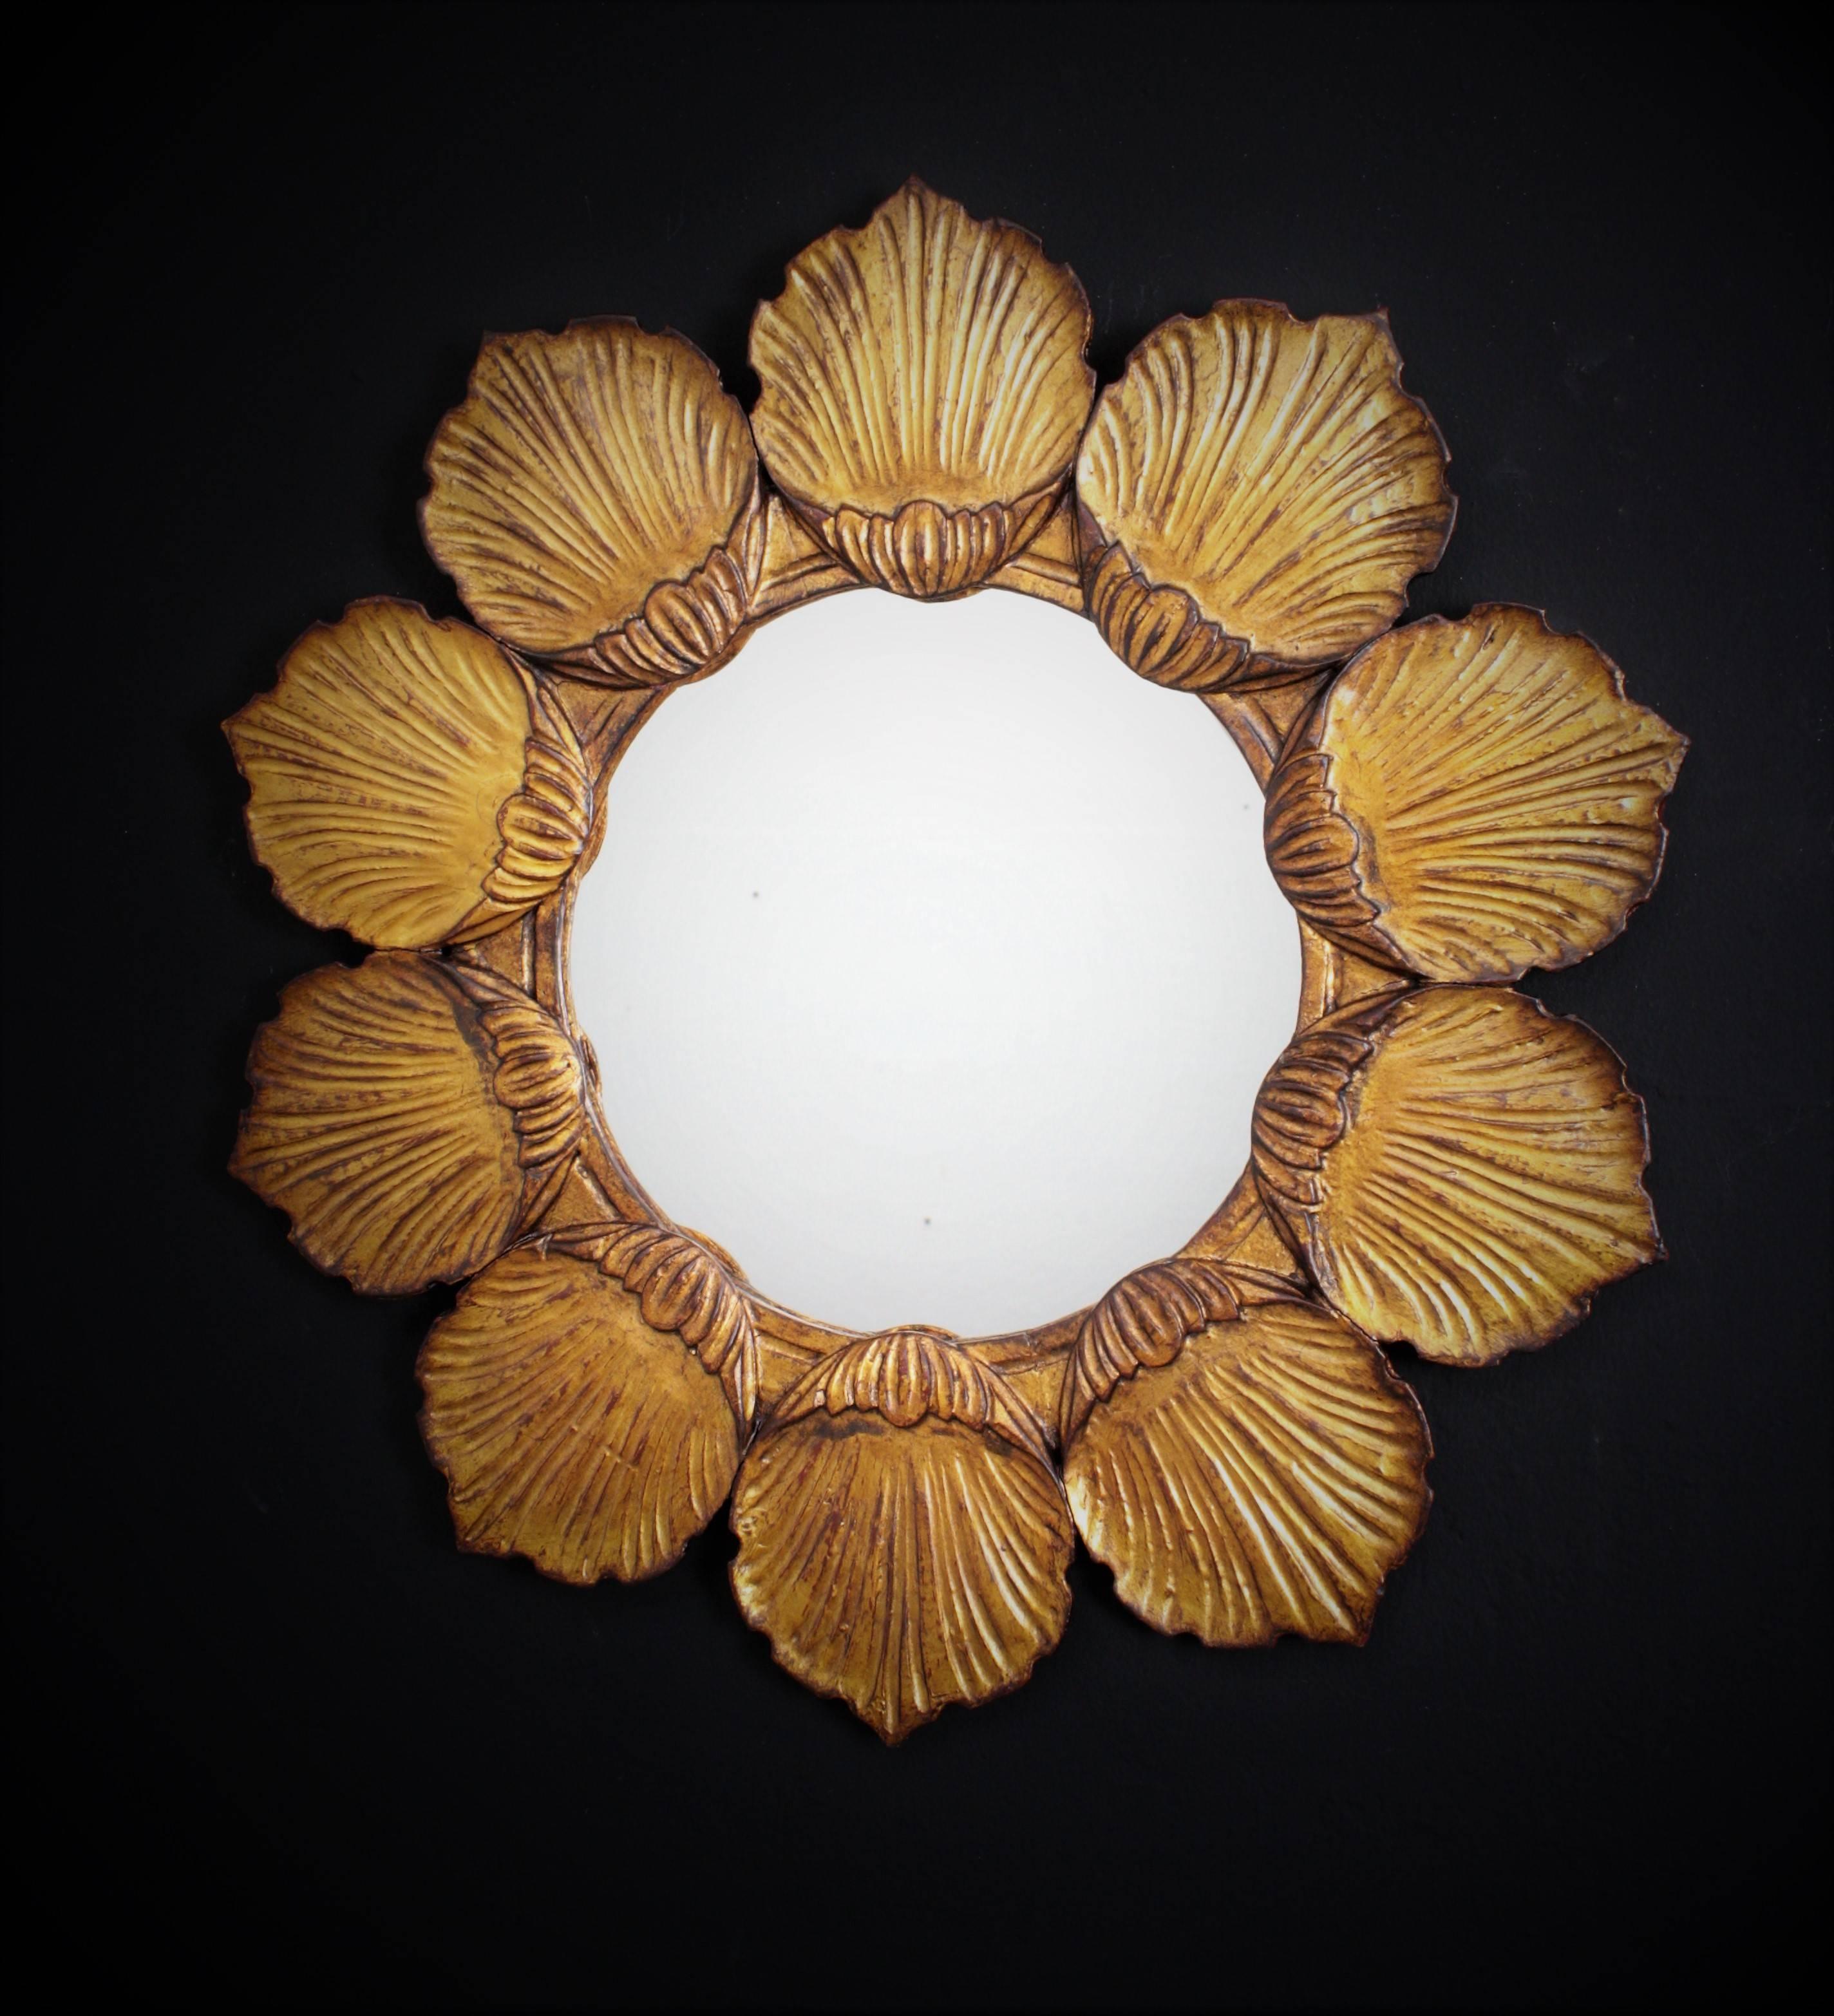 Unique wood carved flower shaped mirror with gold leaf finish. A highly decorative piece with carved flower petals surrounding a circular glass with all the taste of Hollywood Regency style. Glass dimensions: 29 cm diameter.
France, 1950s.
Available